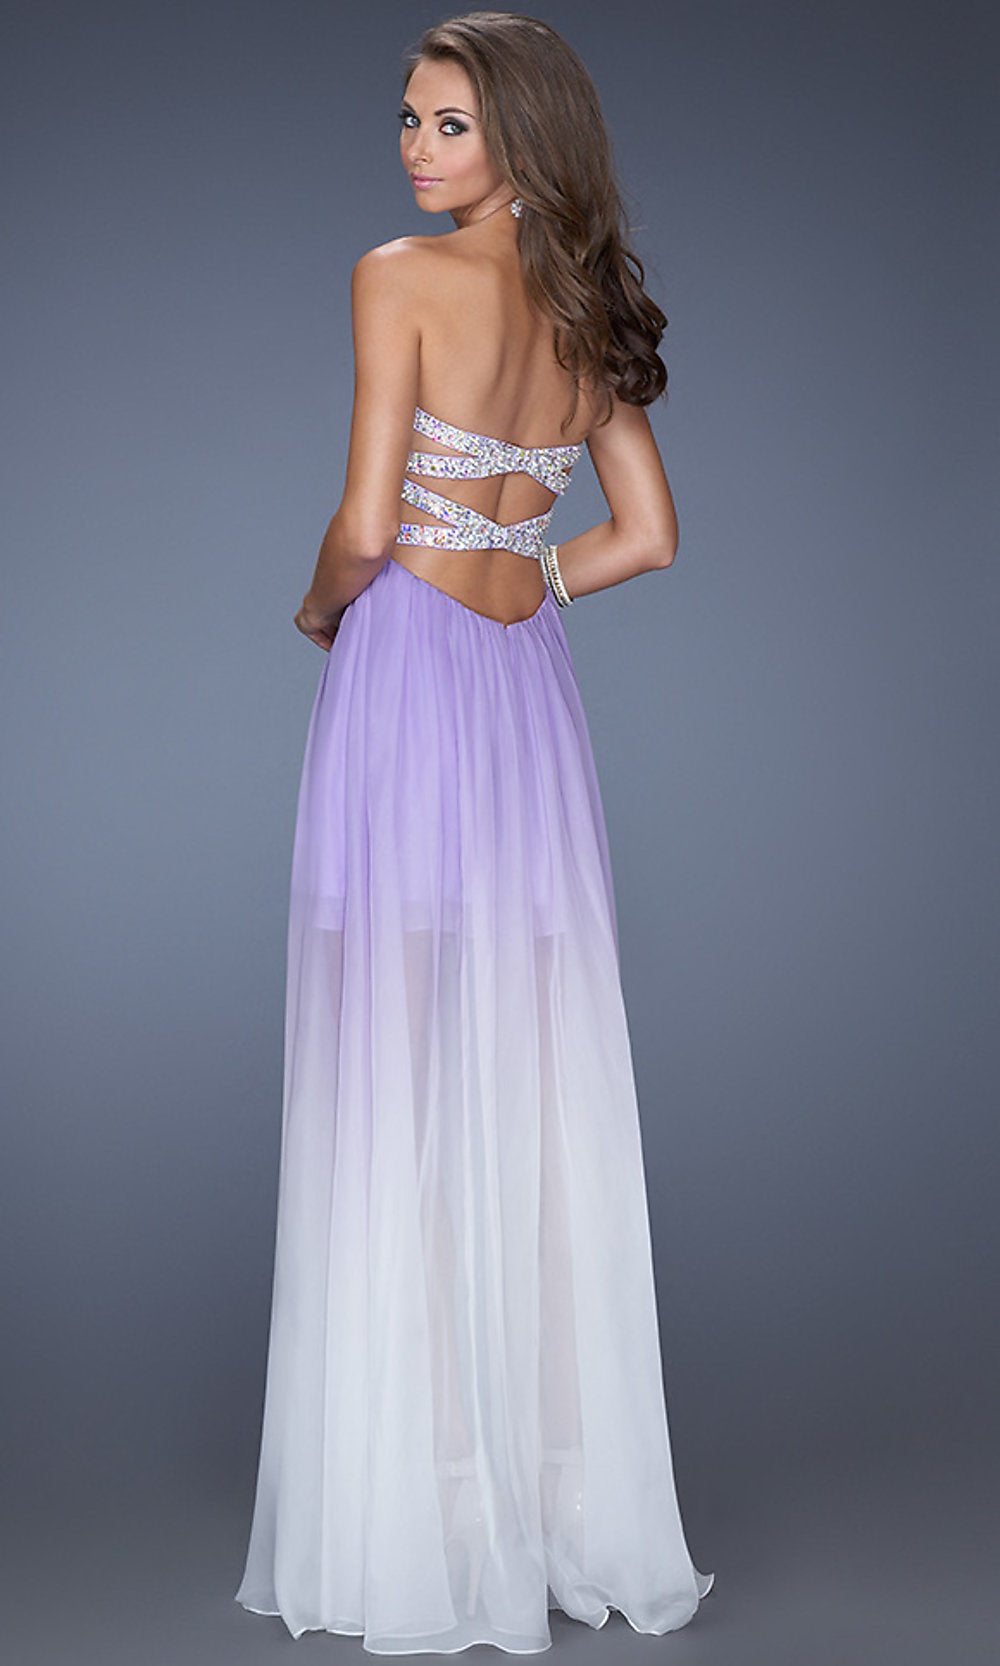  La Femme Strapless Ombre High-Low Prom Dress